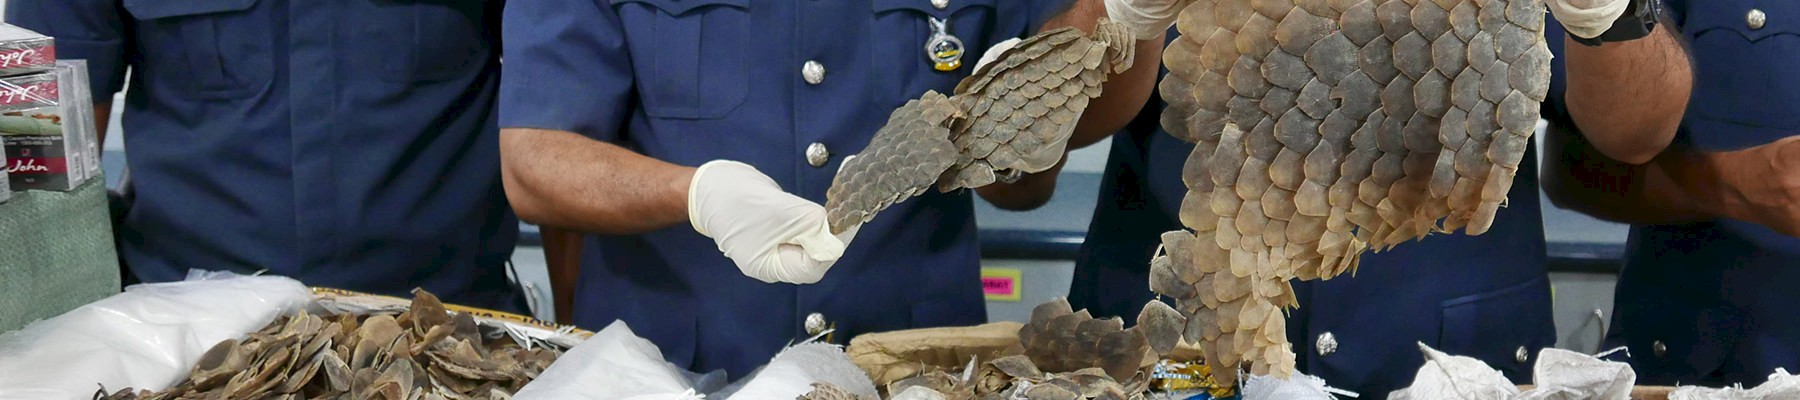 Malaysian Customs officers displaying samples of the scales seized © TRAFFIC